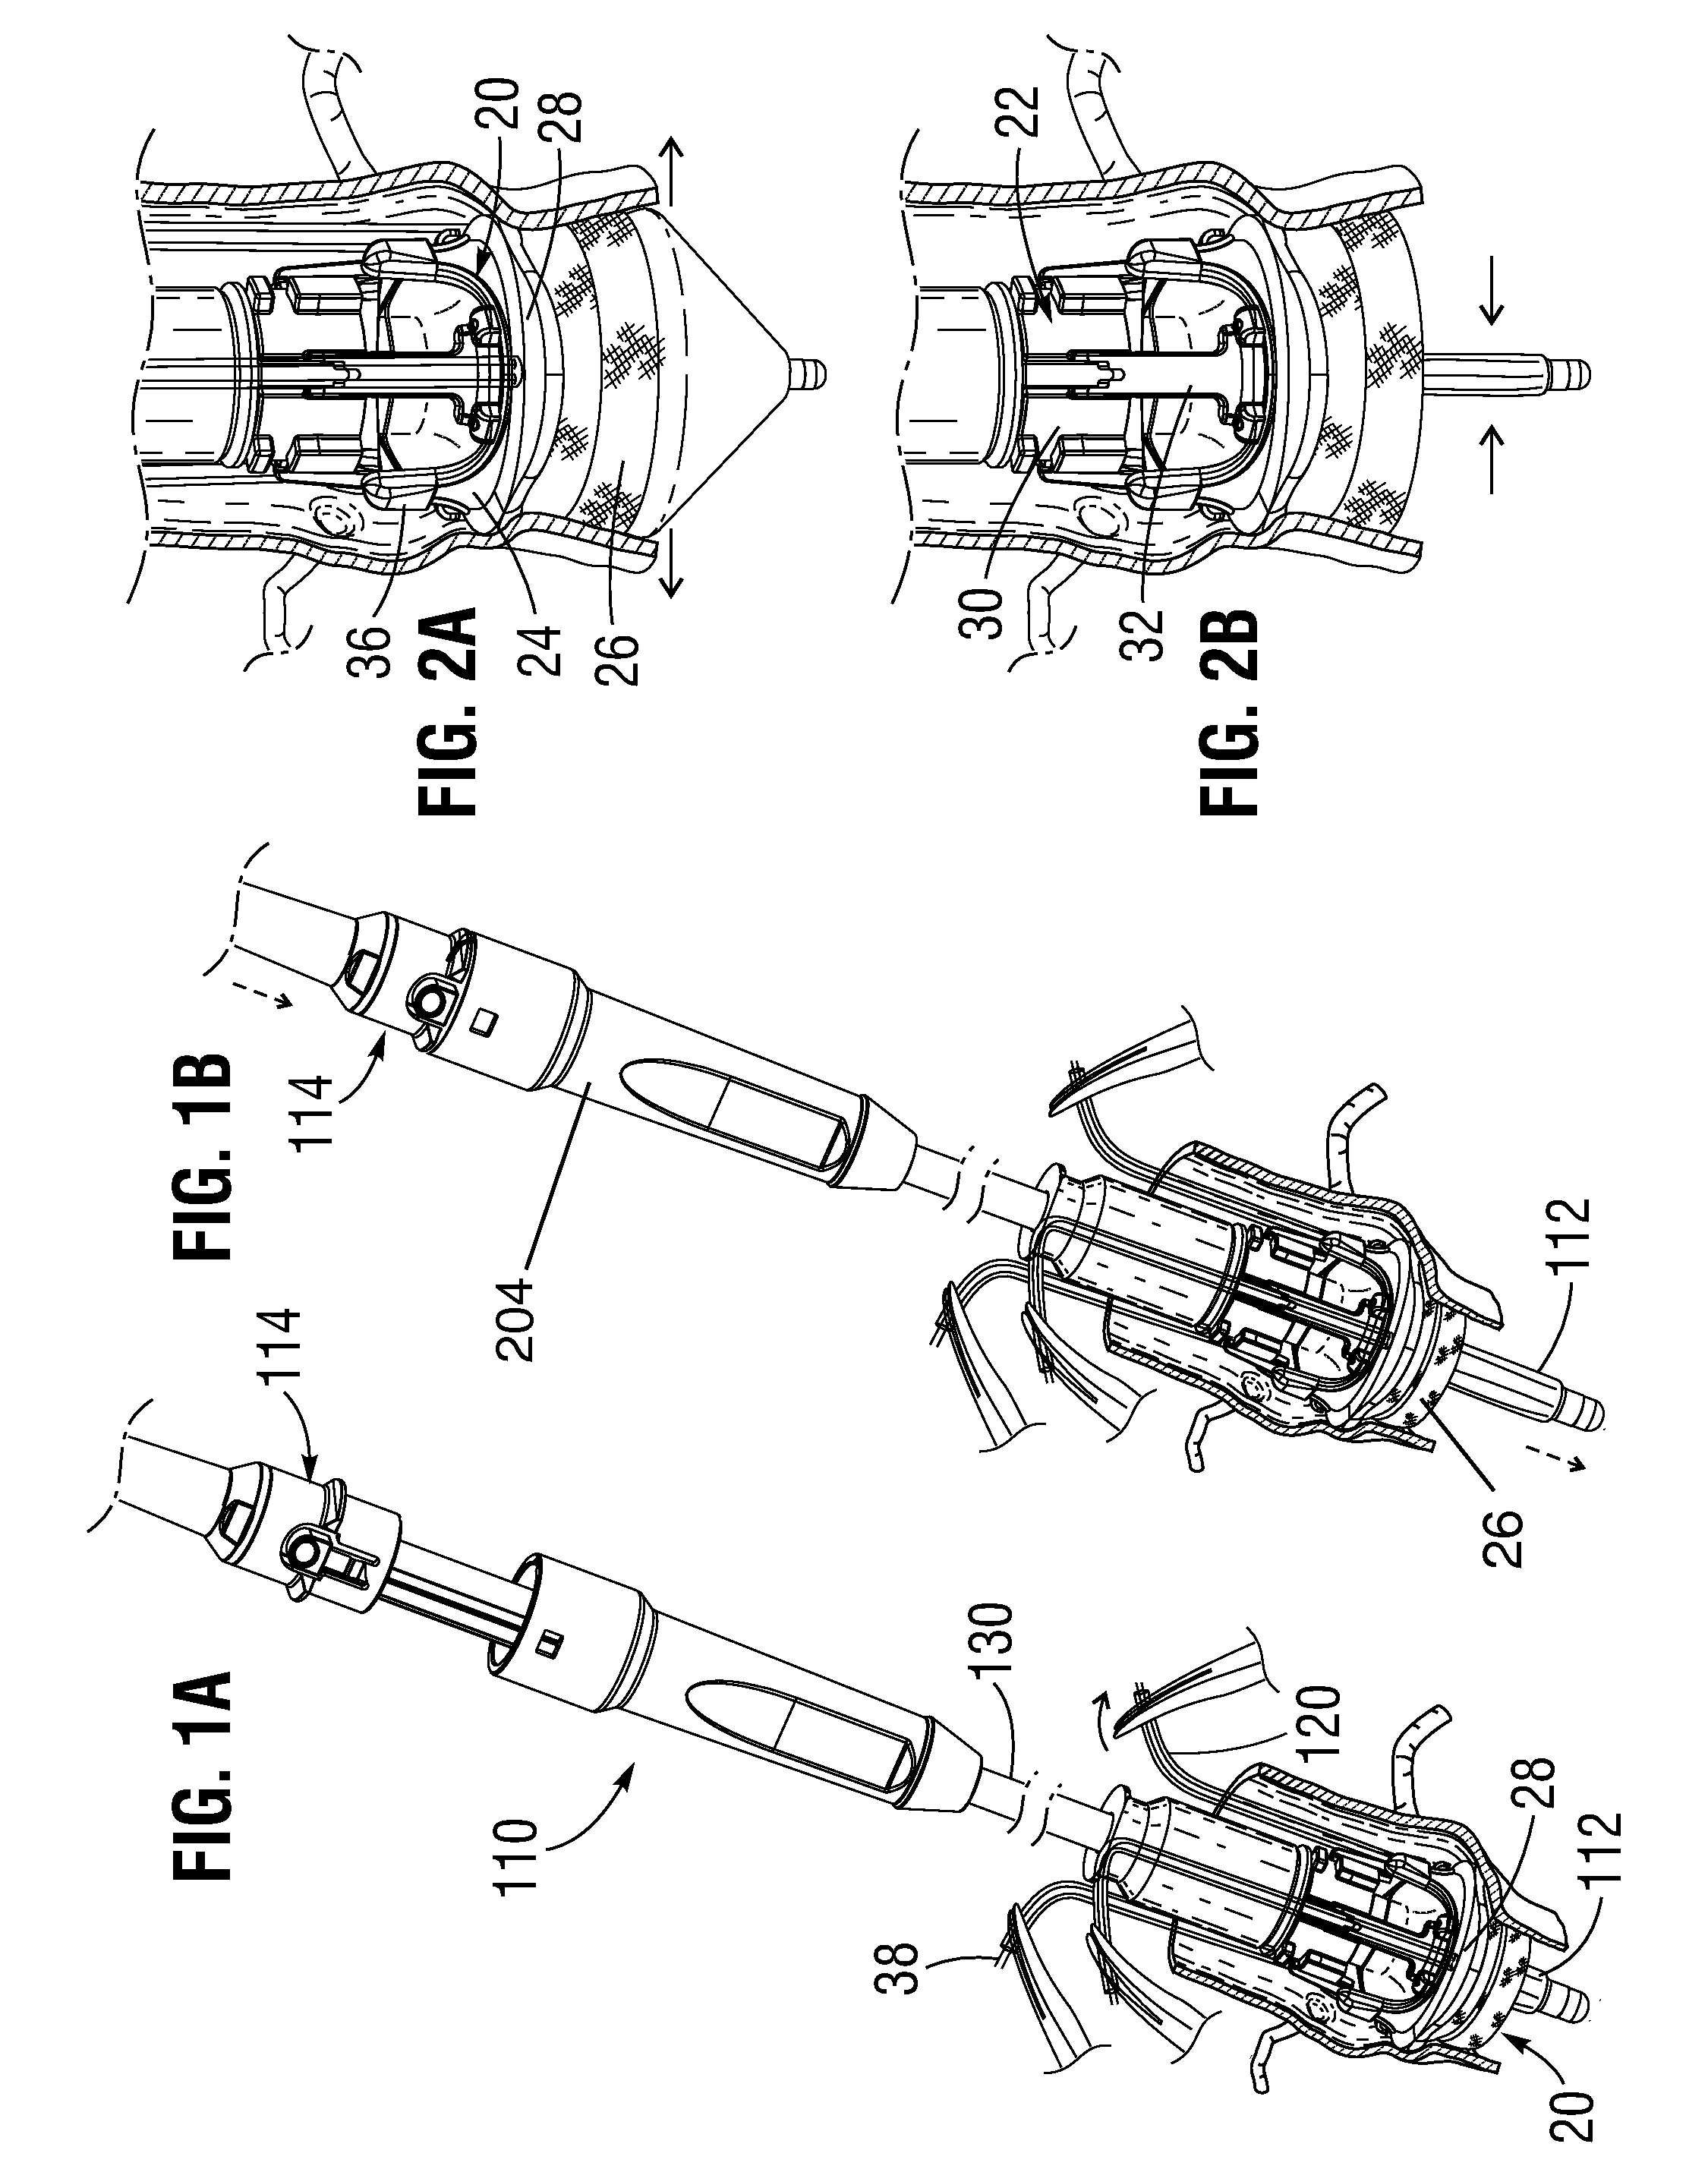 Systems and methods for ensuring safe and rapid deployment of prosthetic heart valves